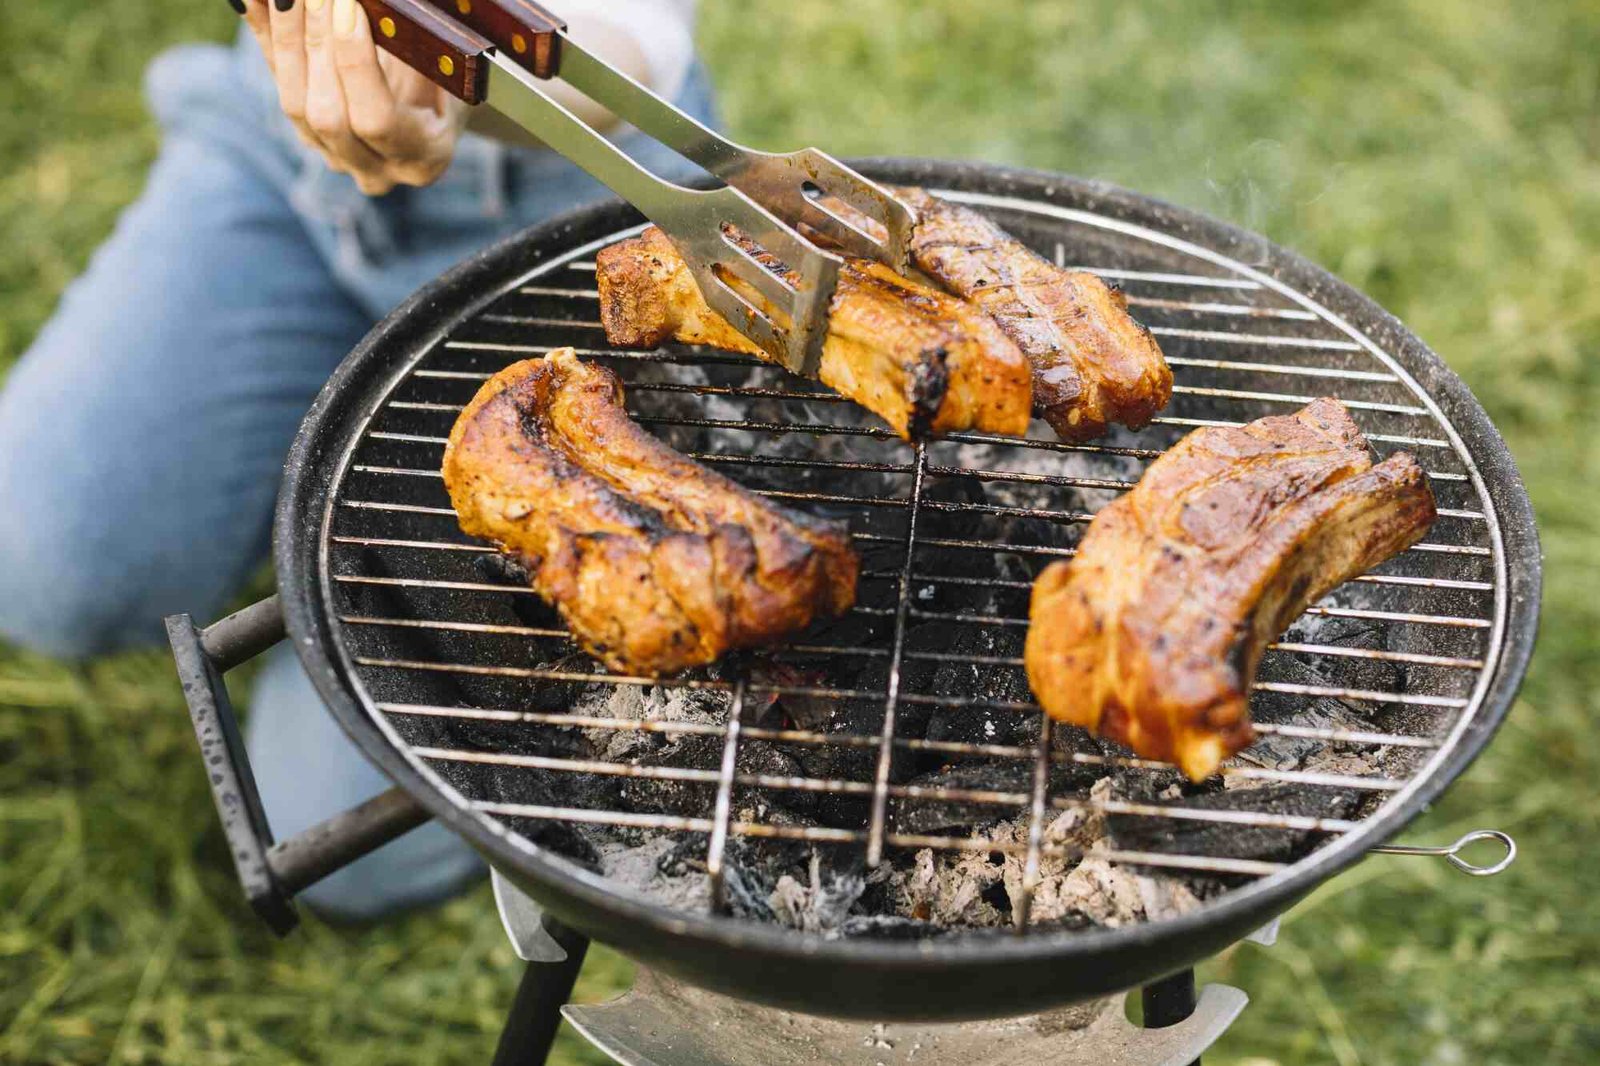 The Best Cuts Of Meat For Grilling In Australia